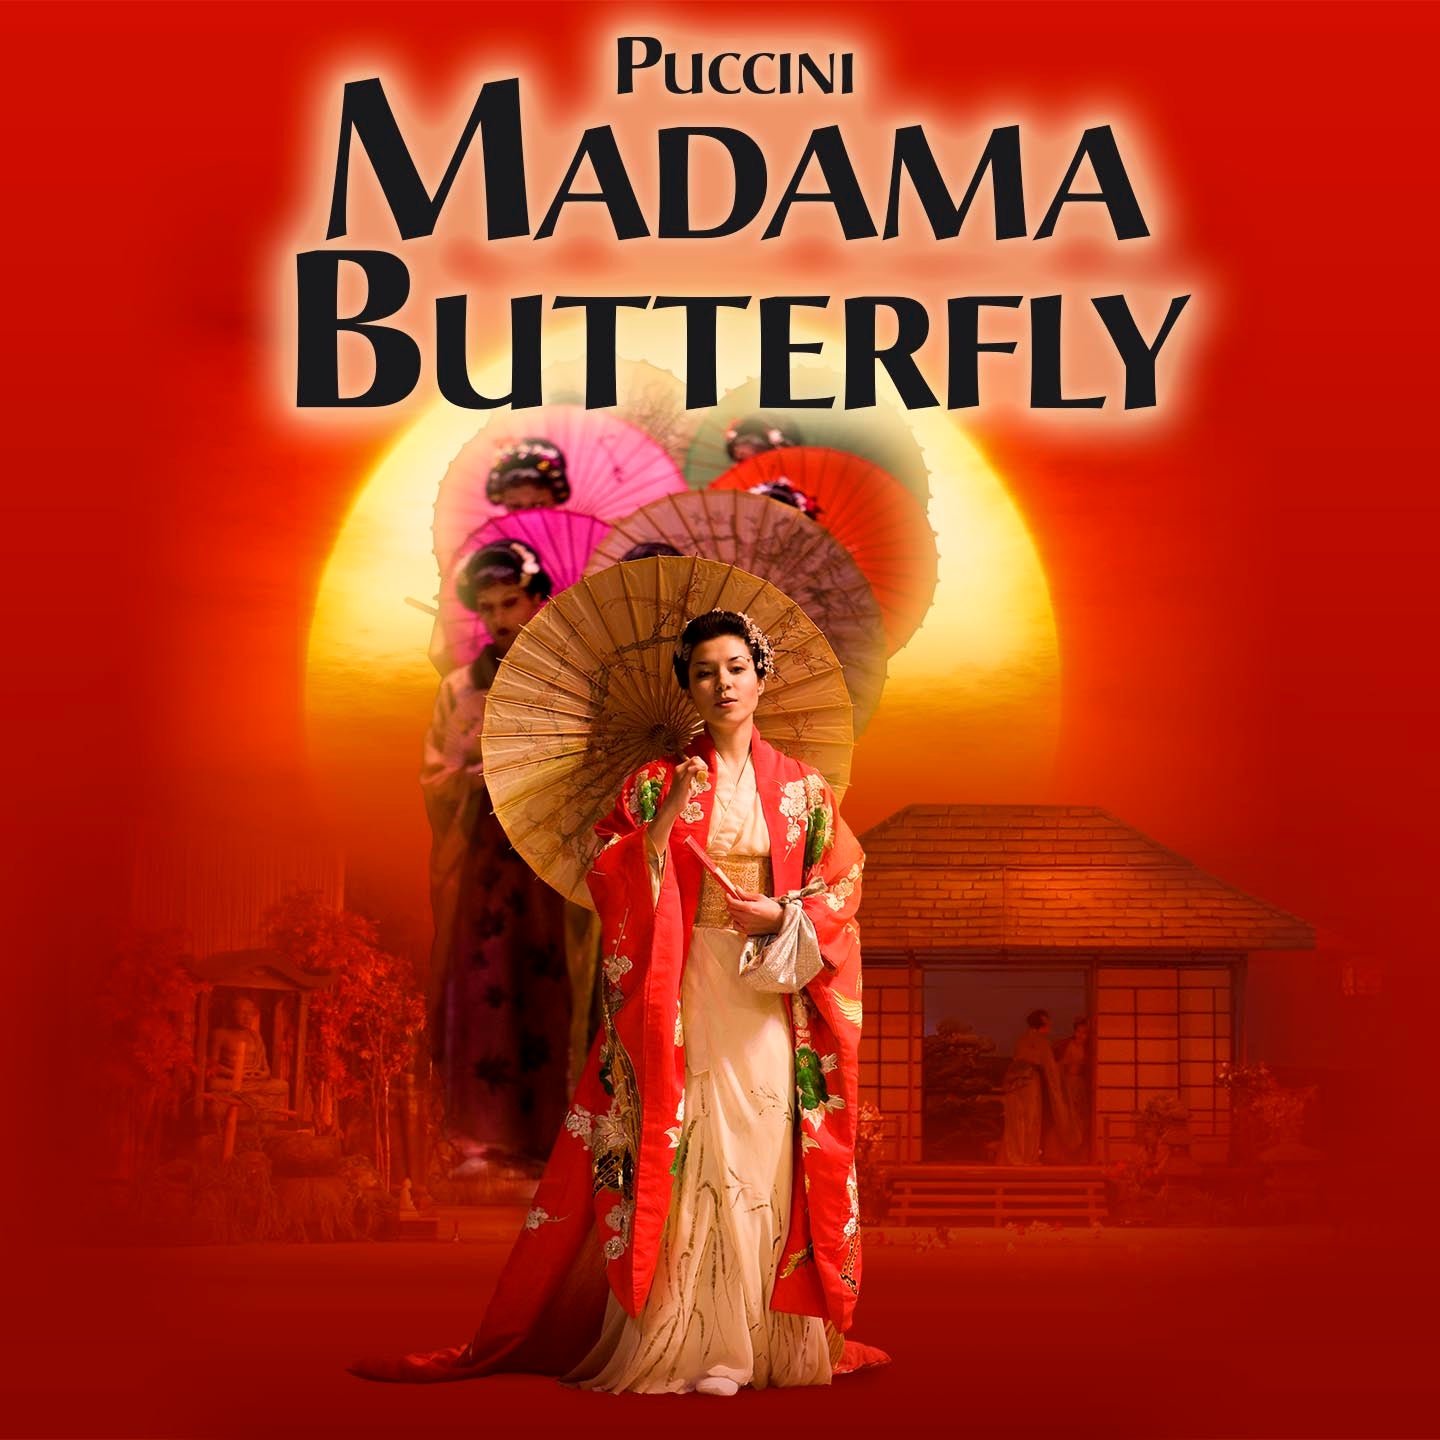 Image name Ellen Kents Madama Butterfly at Hull City Hall Hull the 9 image from the post Ellen Kent's - MADAMA BUTTERFLY at Alhambra Theatre, Bradford in Yorkshire.com.